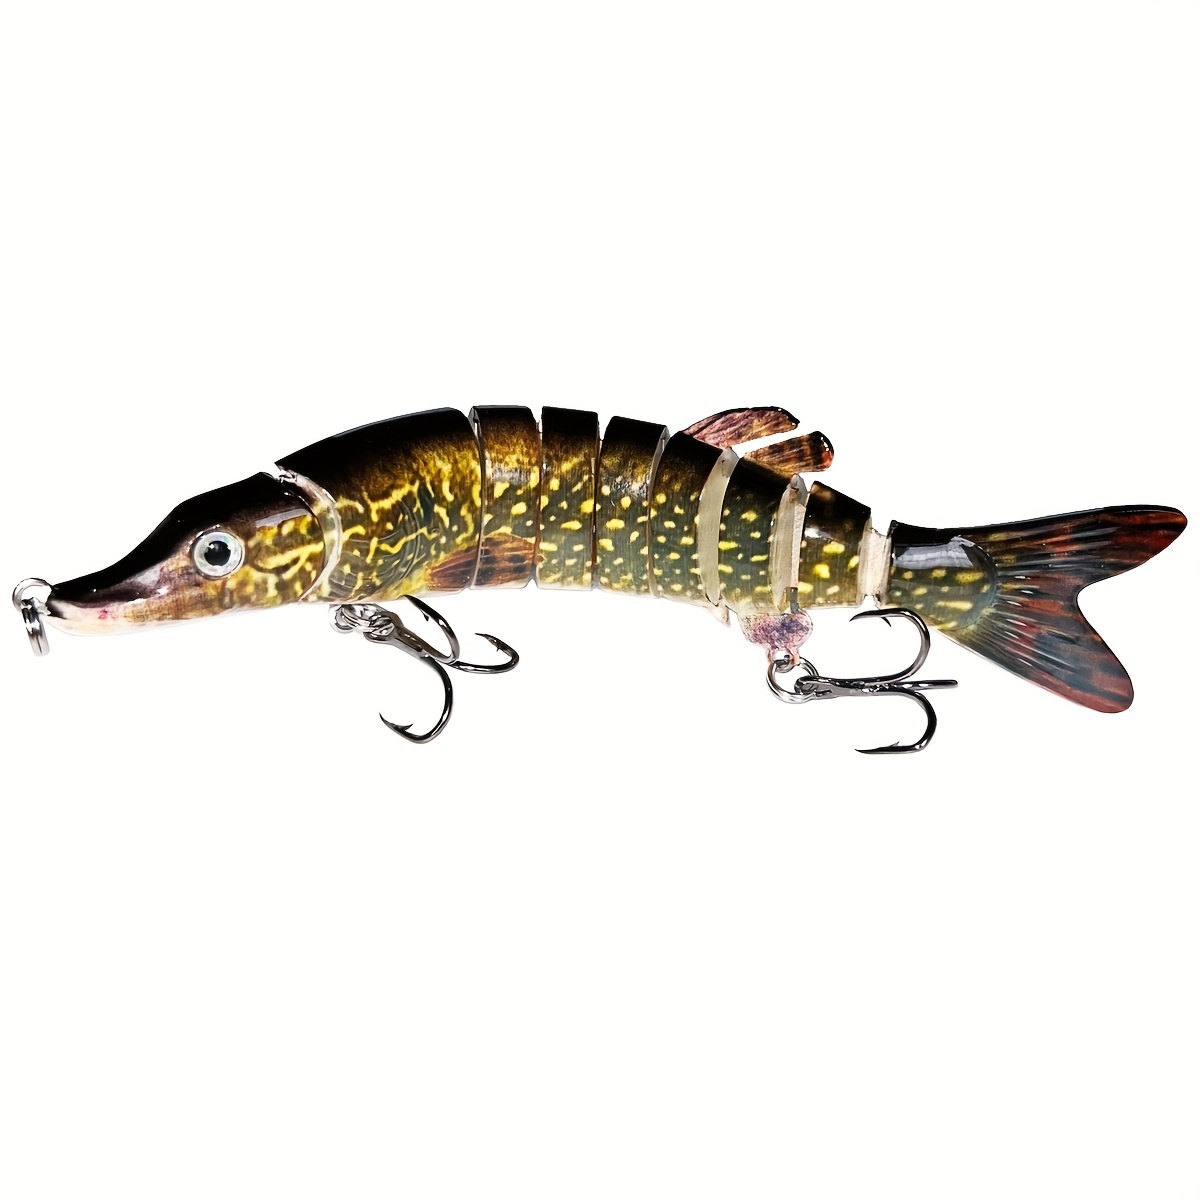 Offshore Trolling Tackle for Salmon Walleye and Striped Bass from